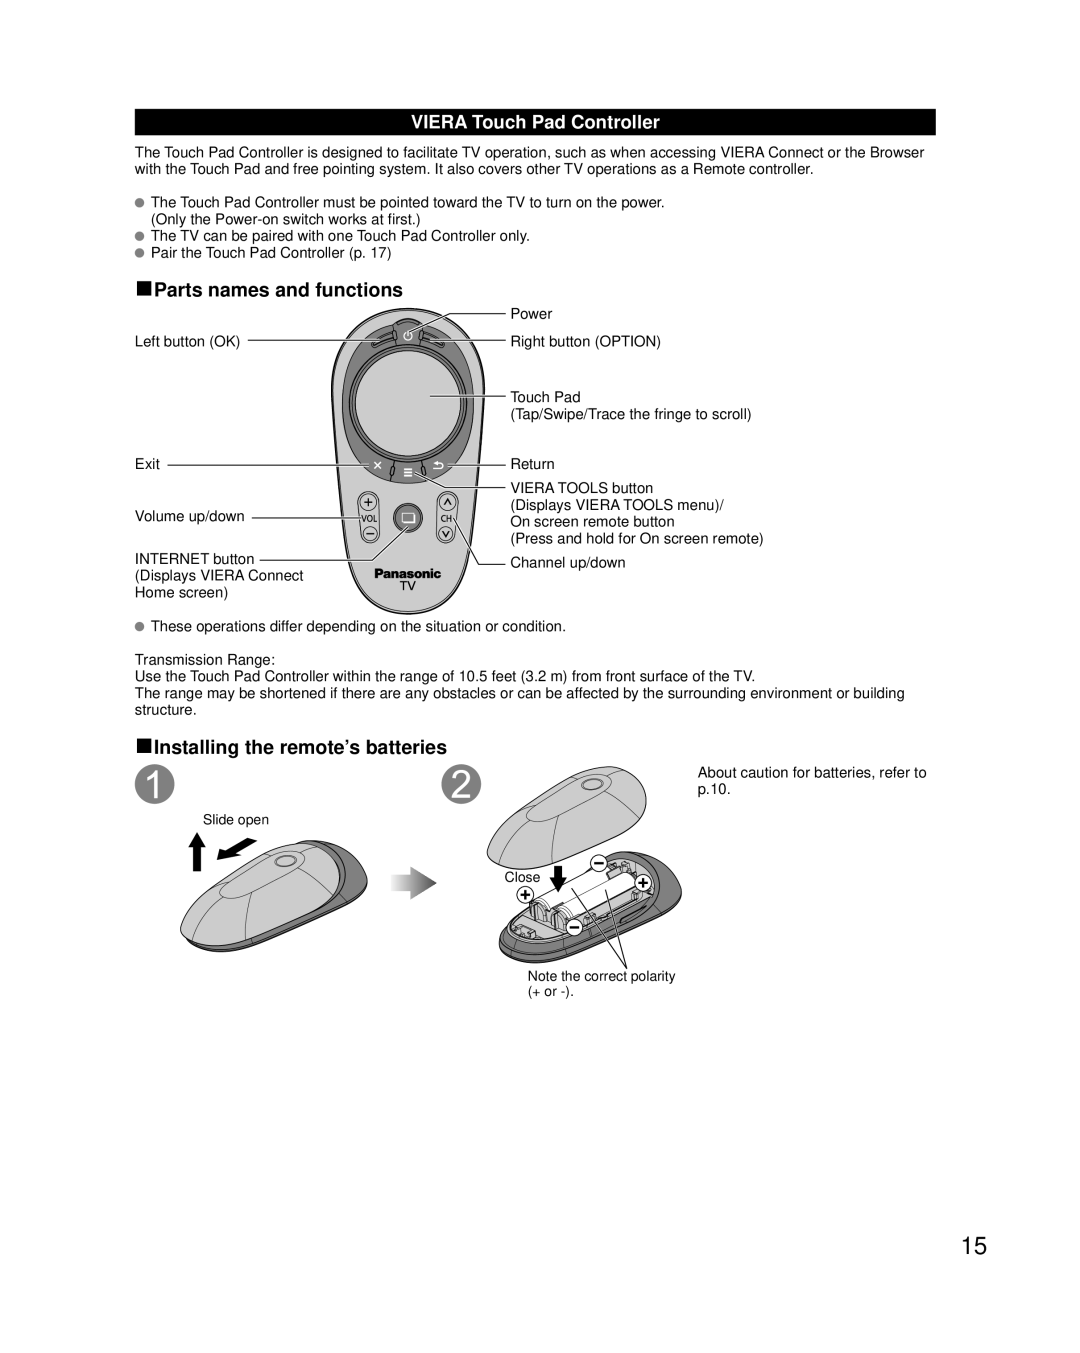 Panasonic TC-P65VT50, TC-P55VT50 Parts names and functions, Installing the remote’s batteries, VIERA Touch Pad Controller 